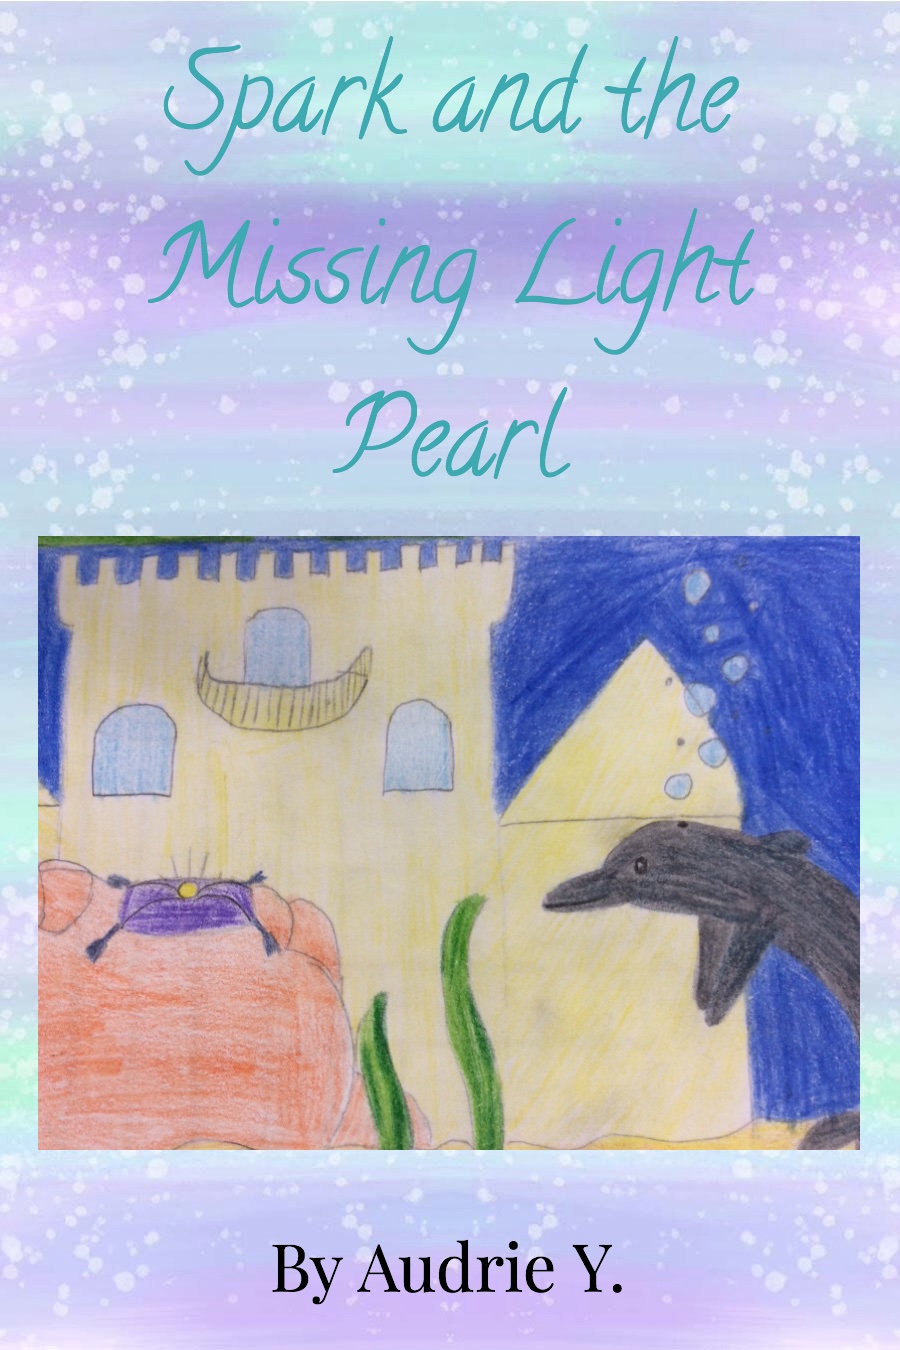 Spark and the Missing Light Pearl by Audrie Y